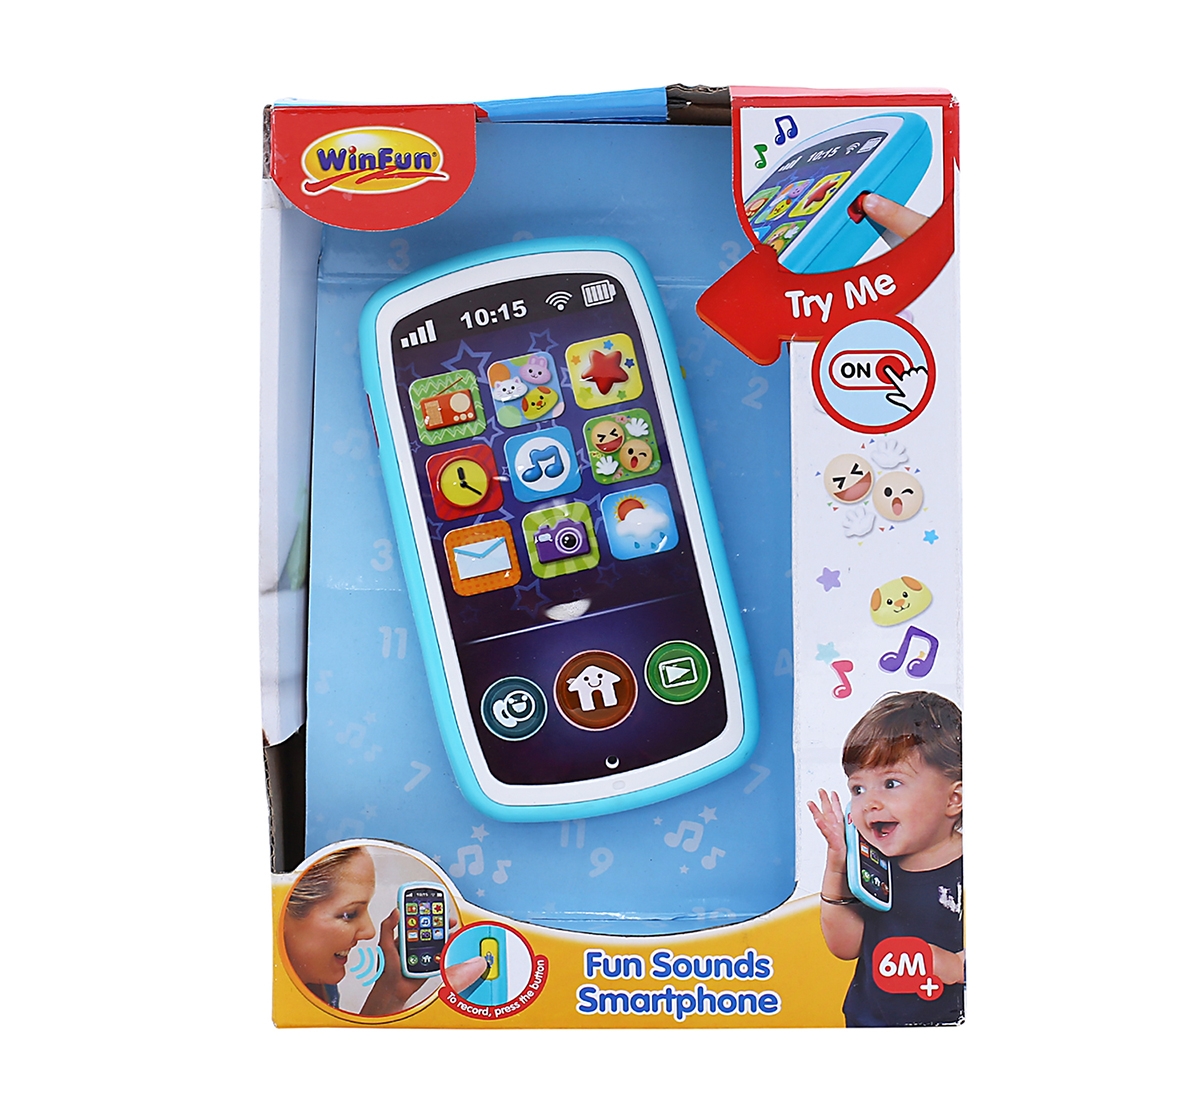 WinFun | Winfun Fun Sounds Smartphone, Multi Color Early Learner Toys for Kids age 6M+ 